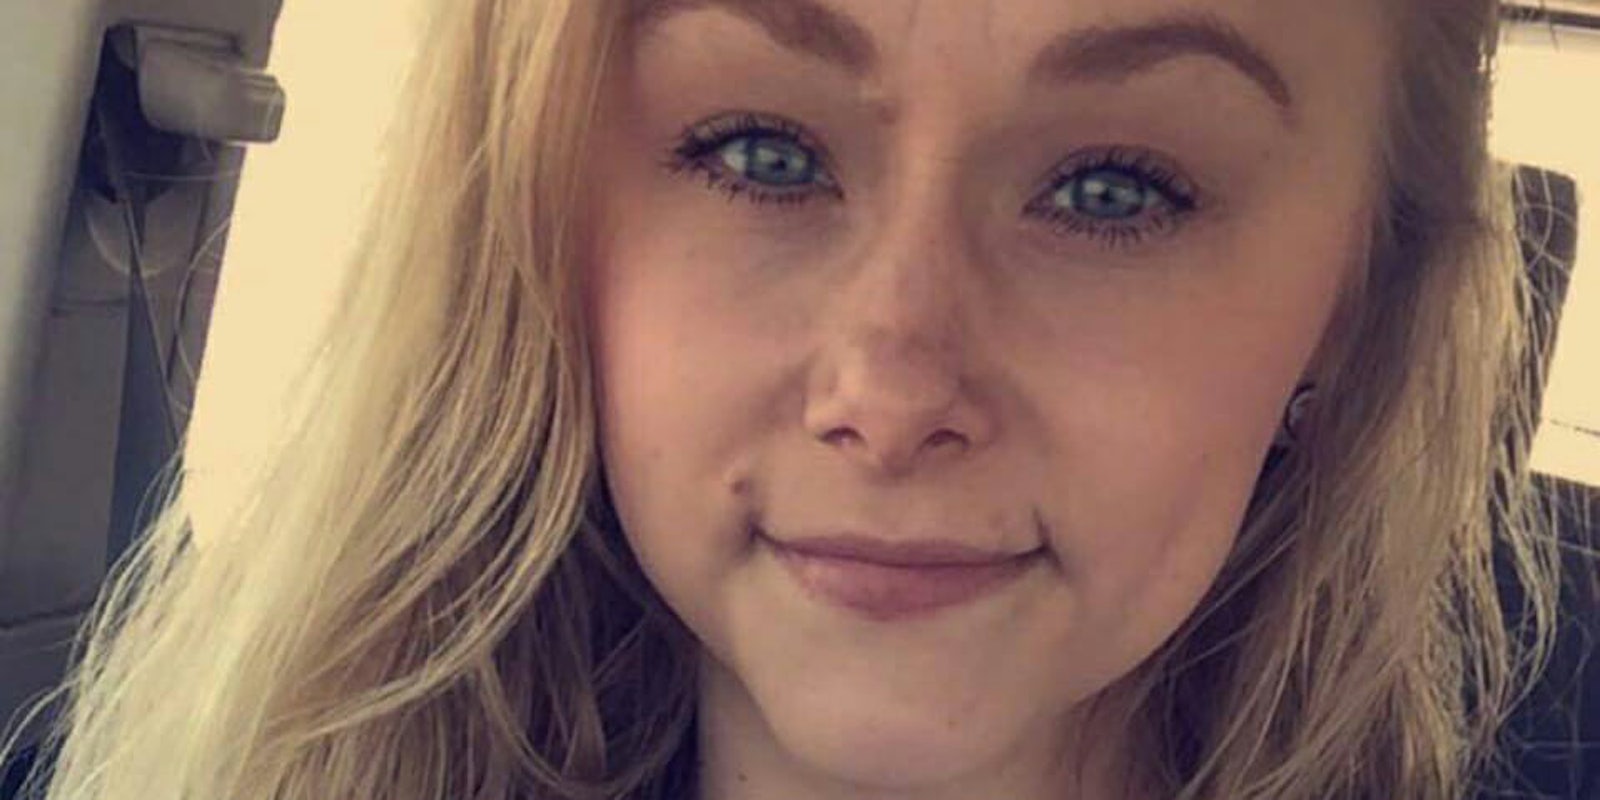 Police have found the body of a woman who was reported missing after a Tinder date.